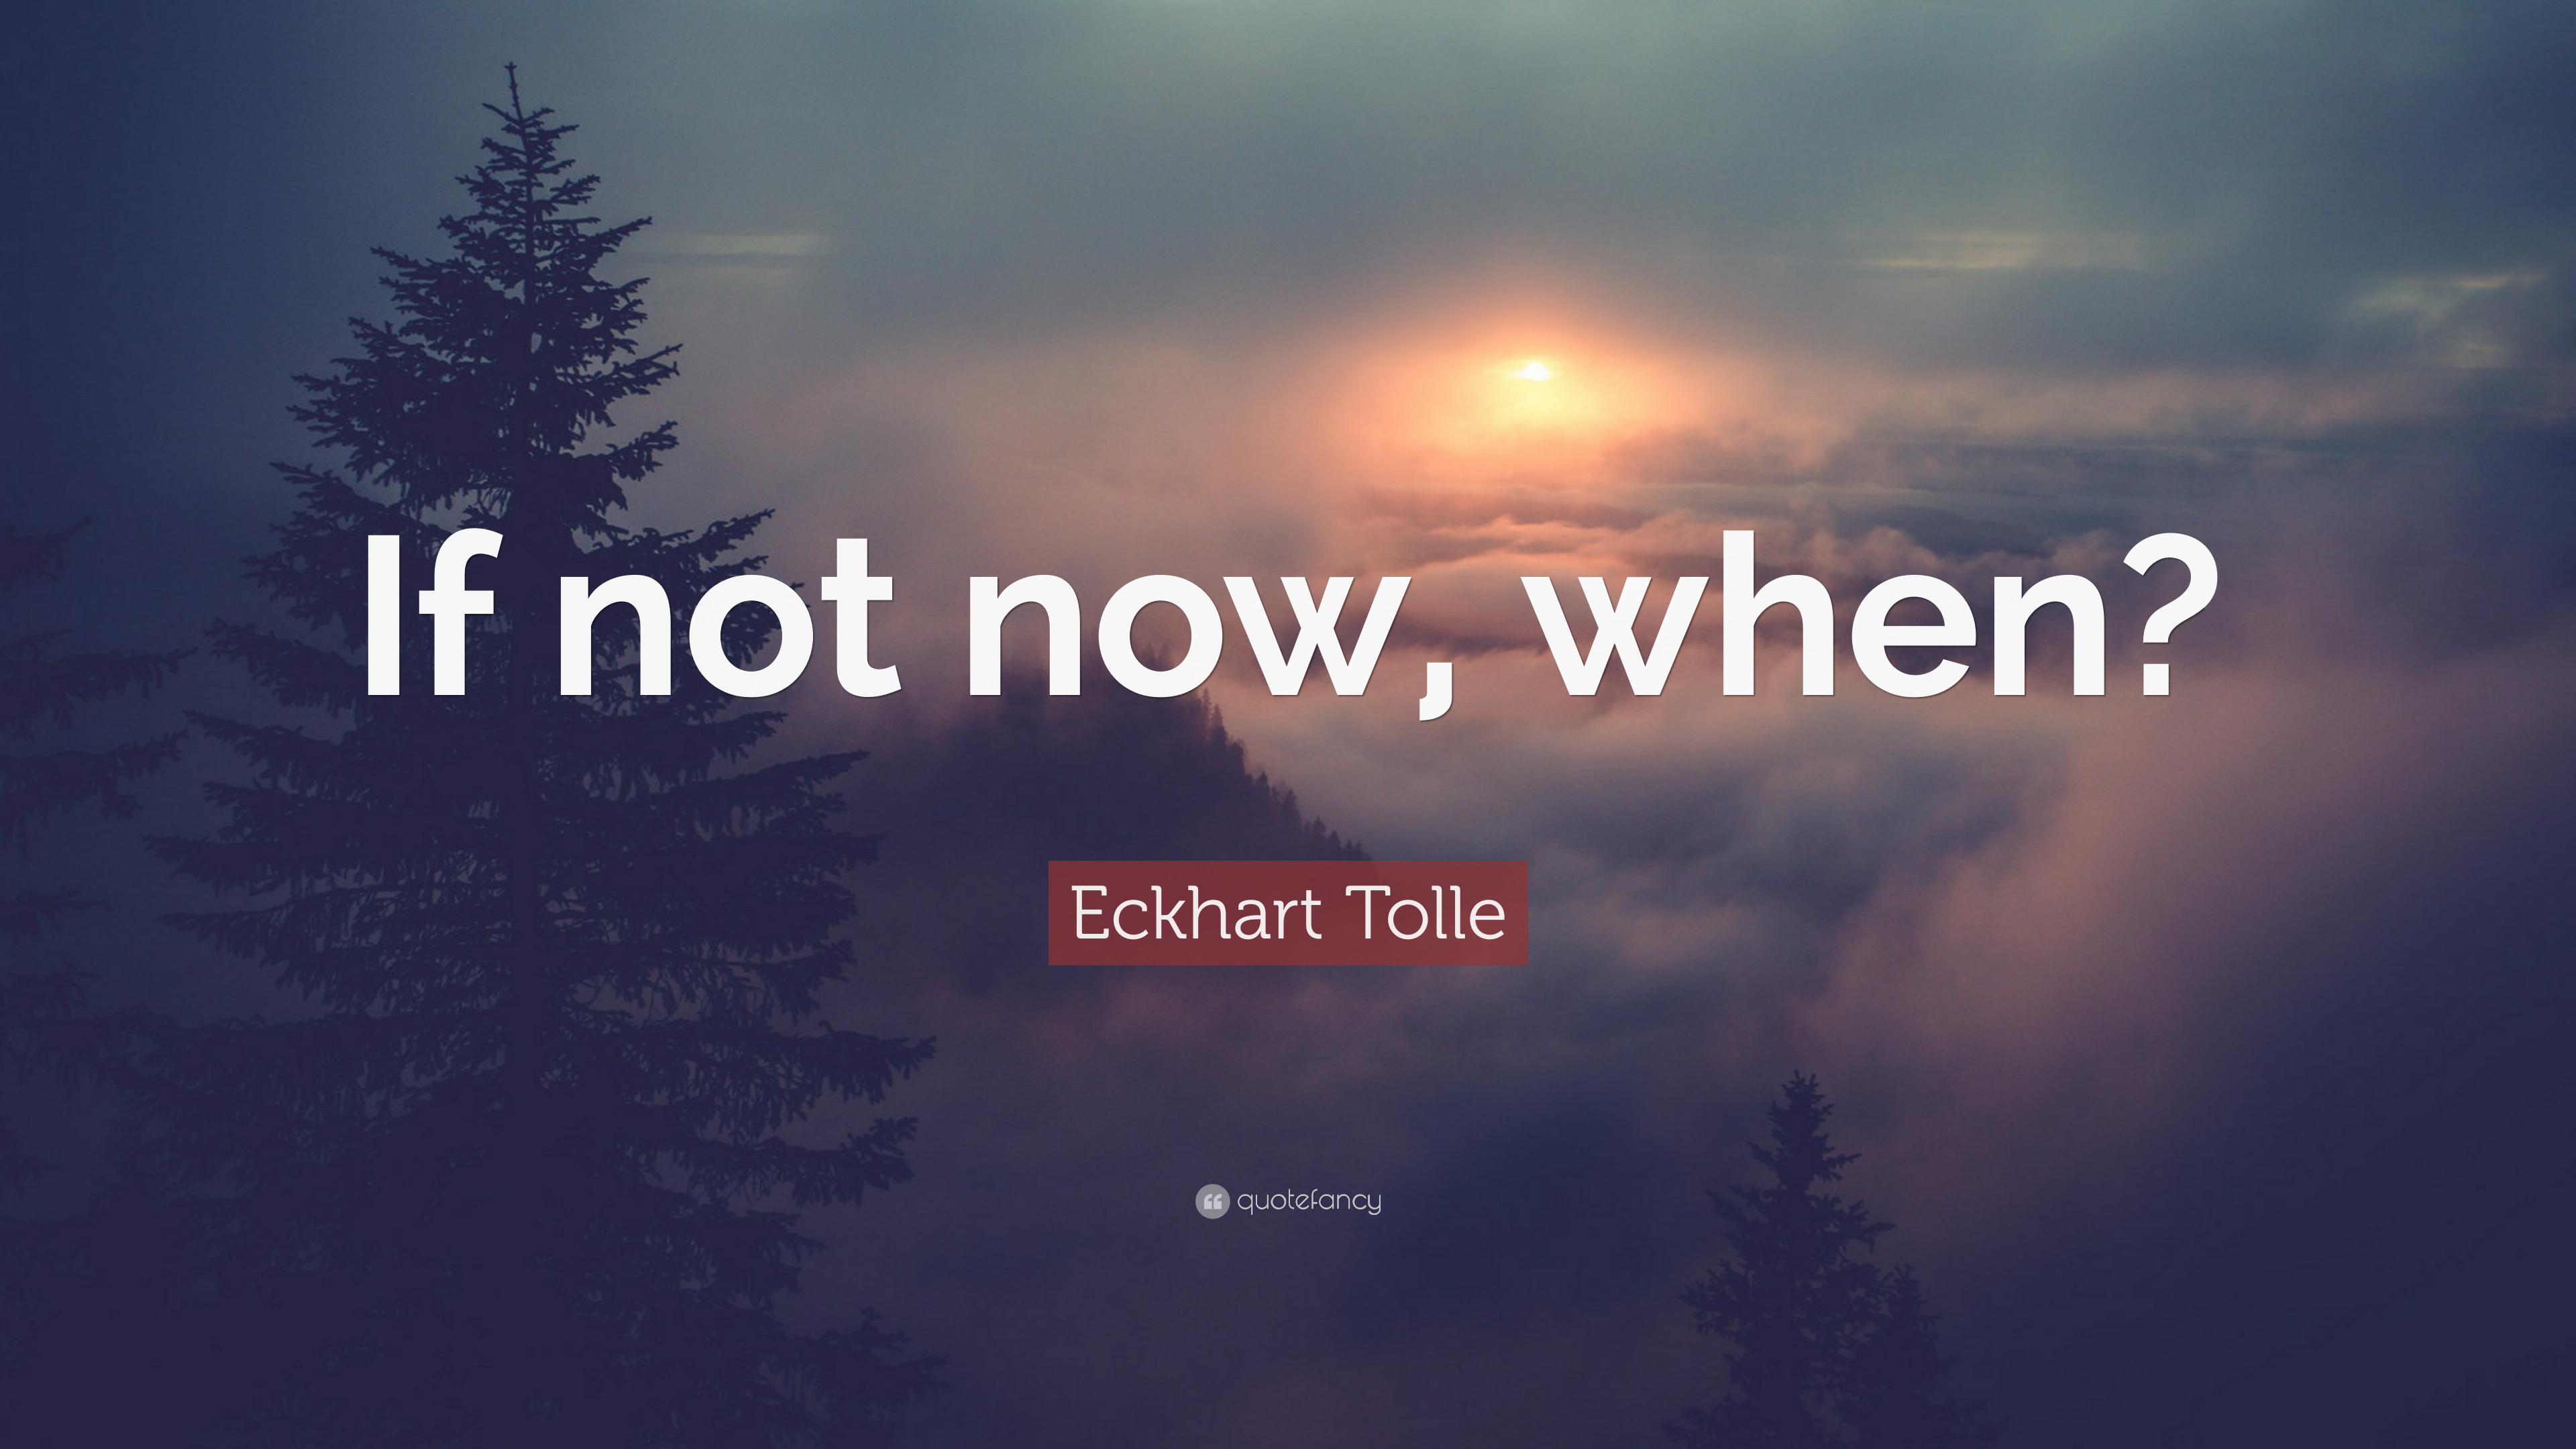 Eckhart Tolle Quote: “If not now, when?”